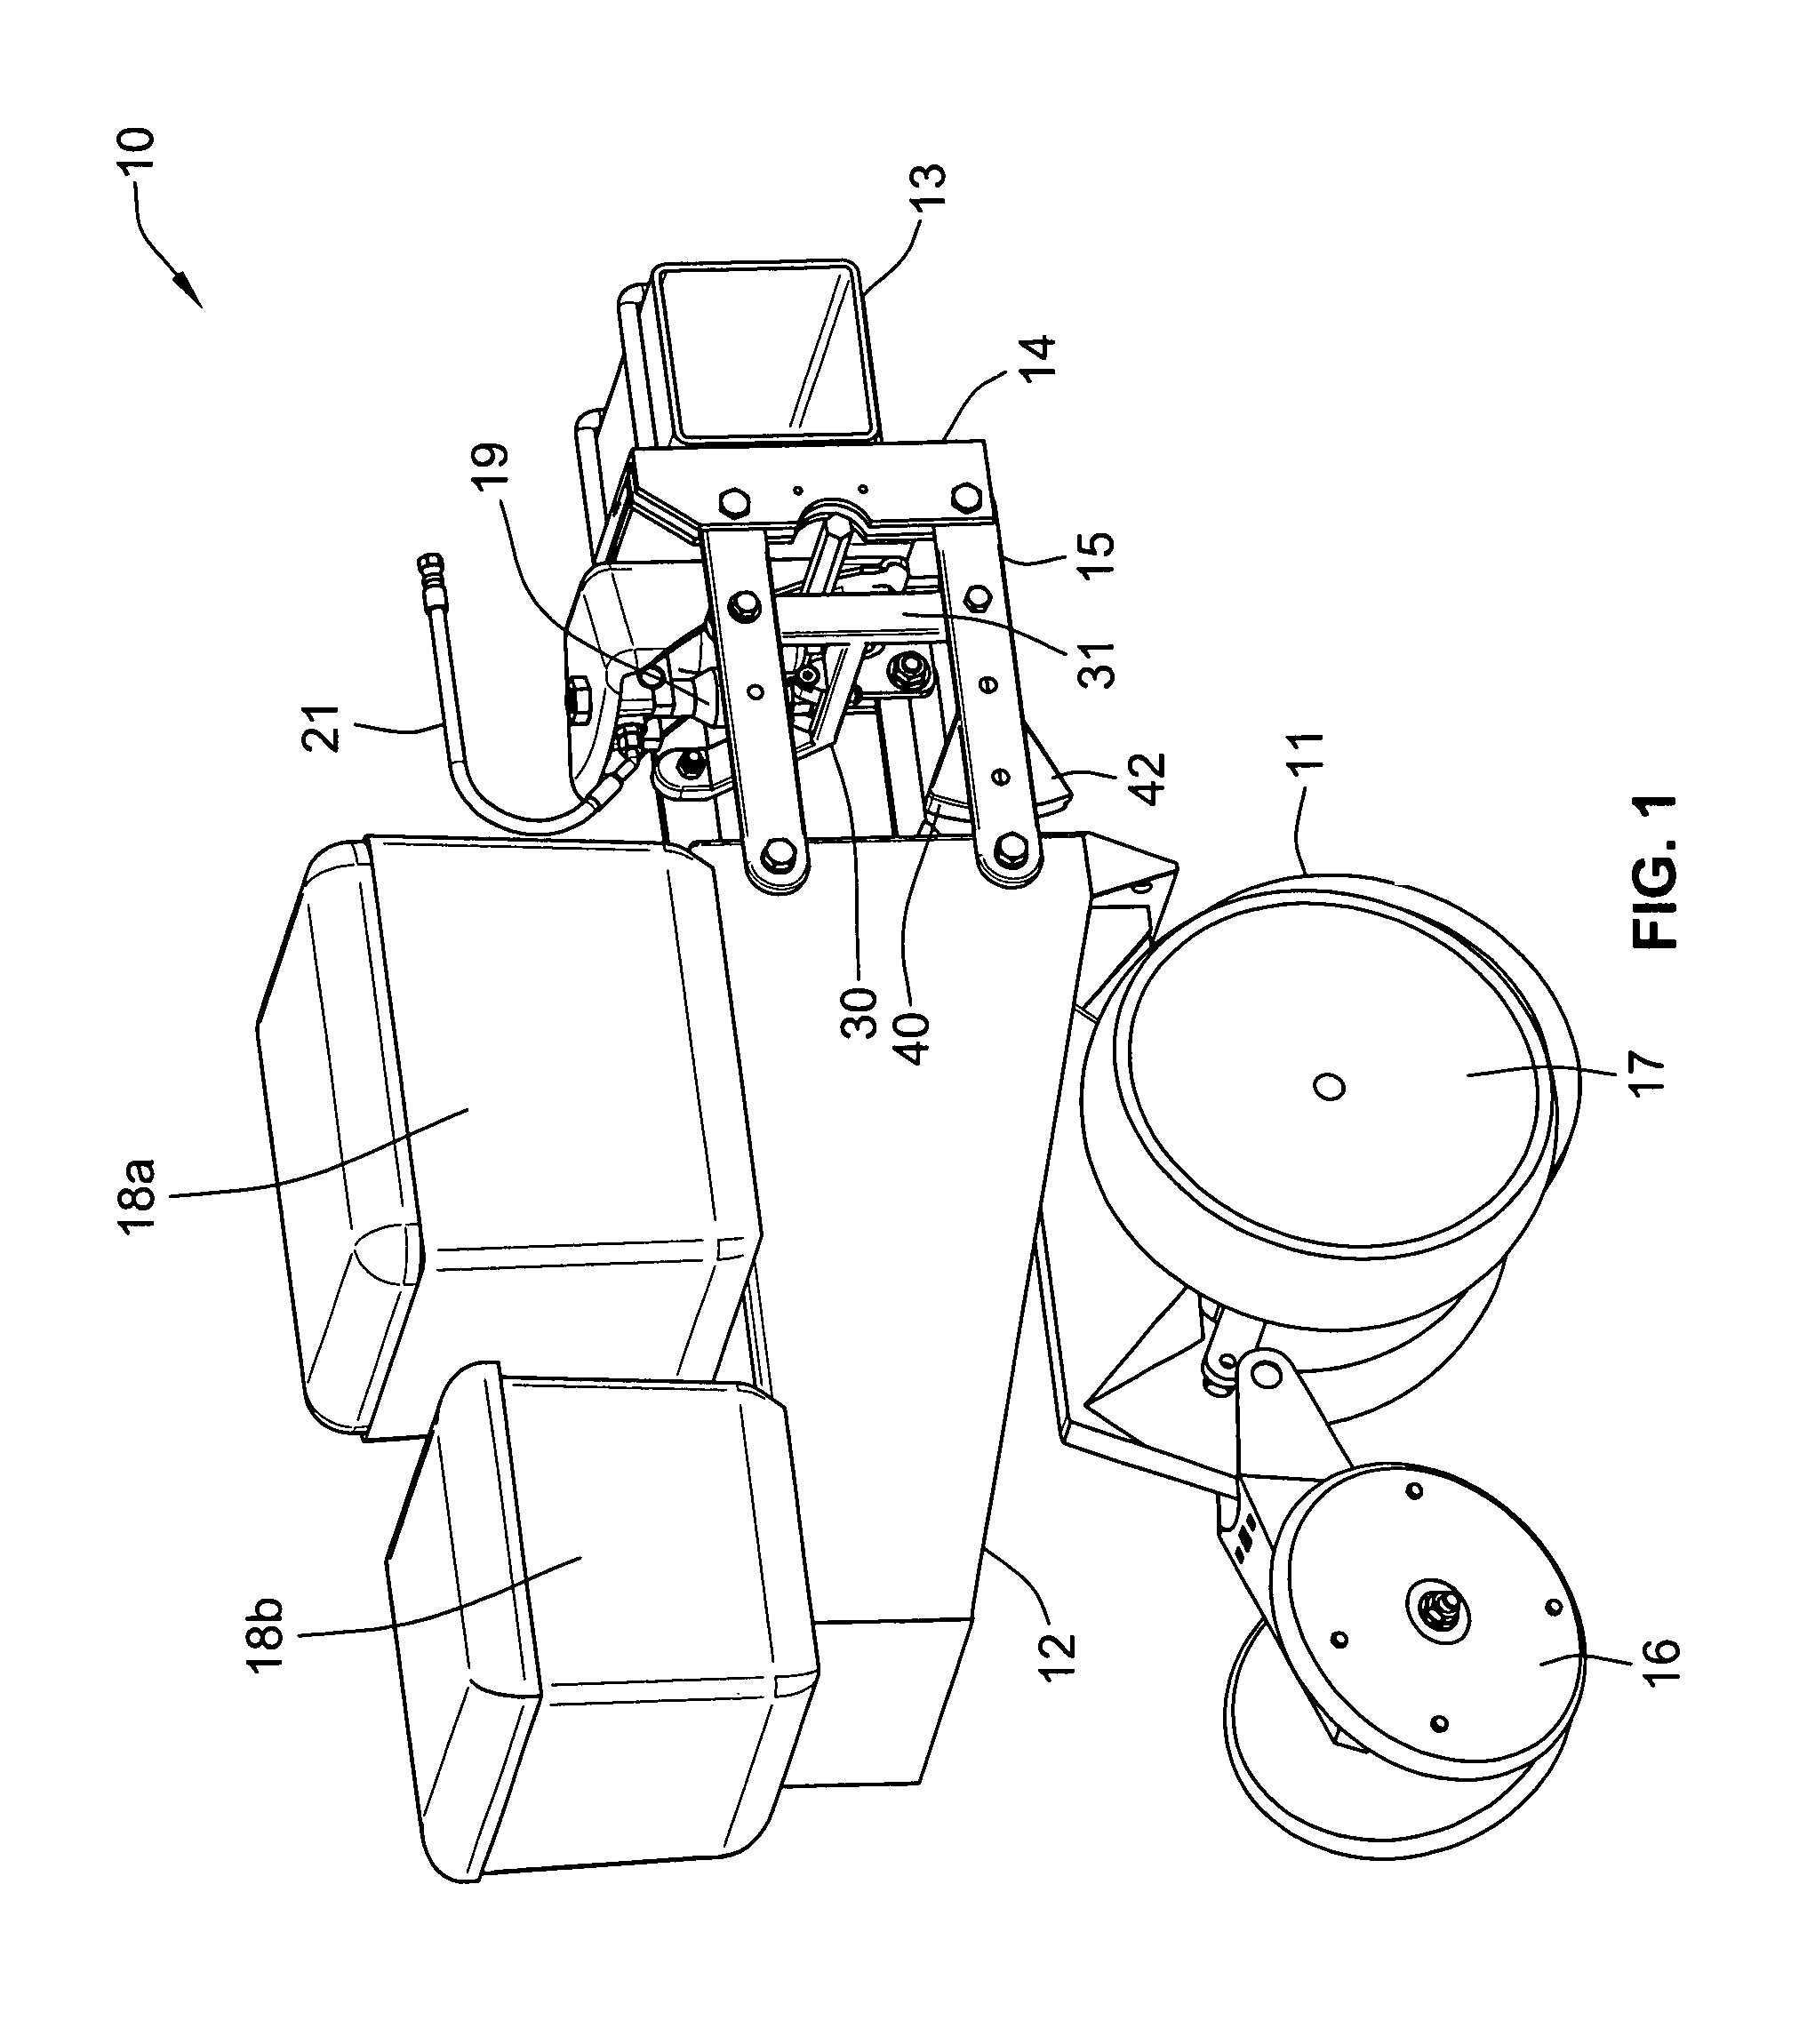 Hydraulic down pressure control system for an agricultural implement